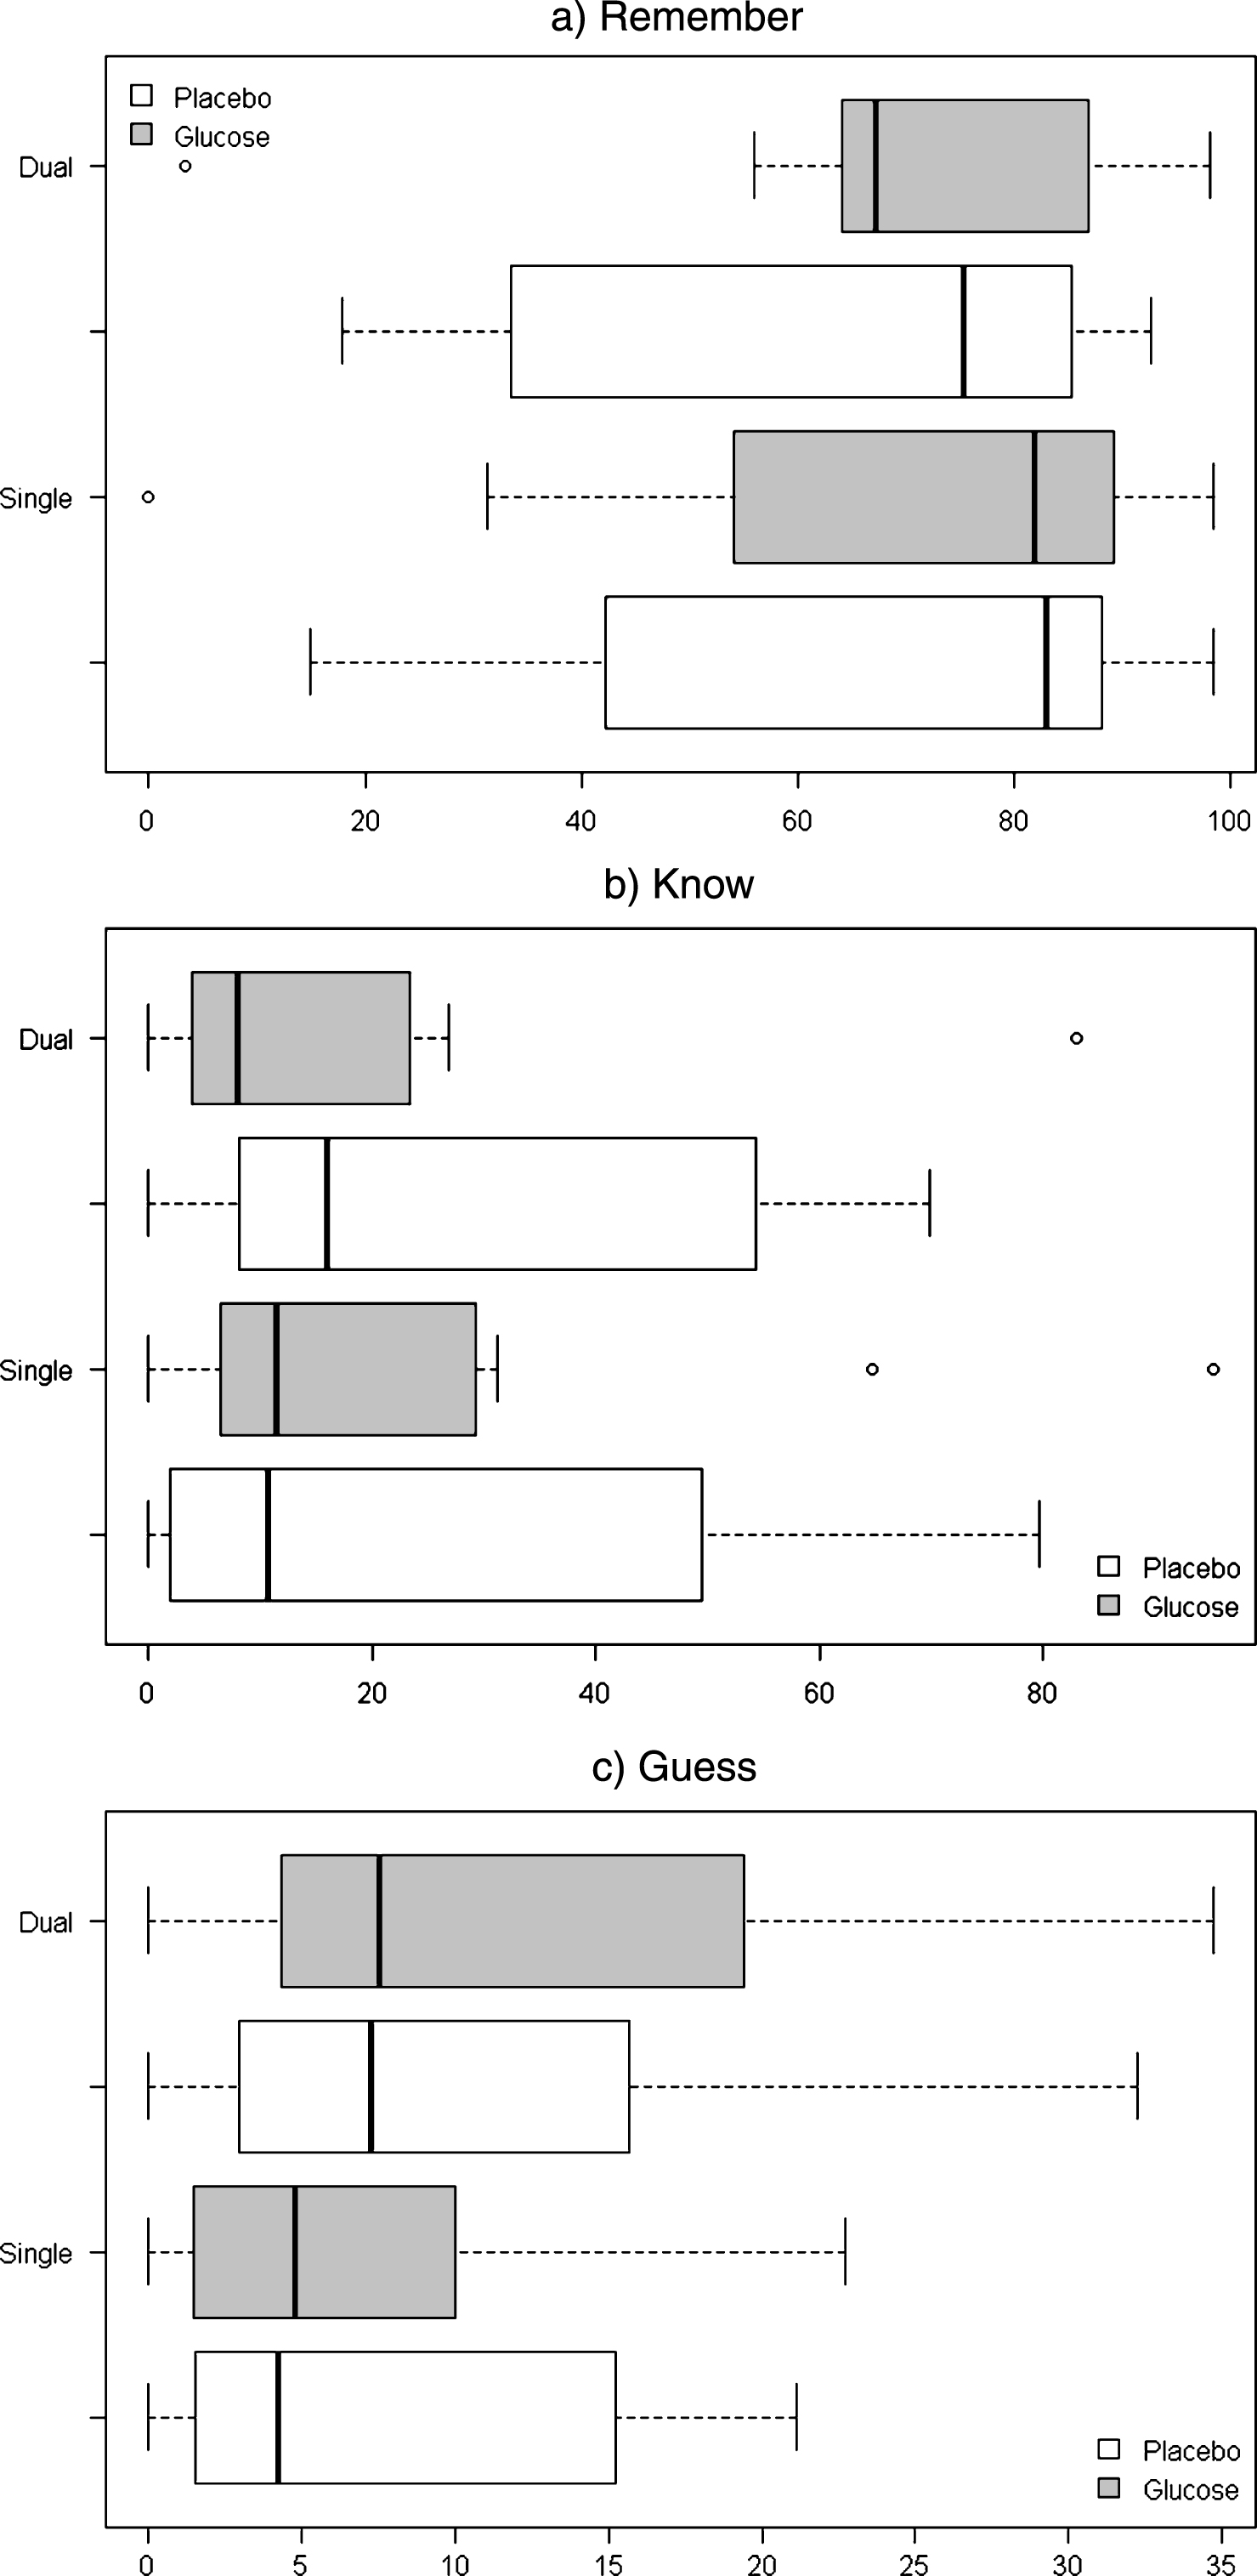 Boxplots for median proportions of a) Remember, b) Know and c) Guess responses according to treatment (Glucose, Placebo) and Task (Single, Dual).